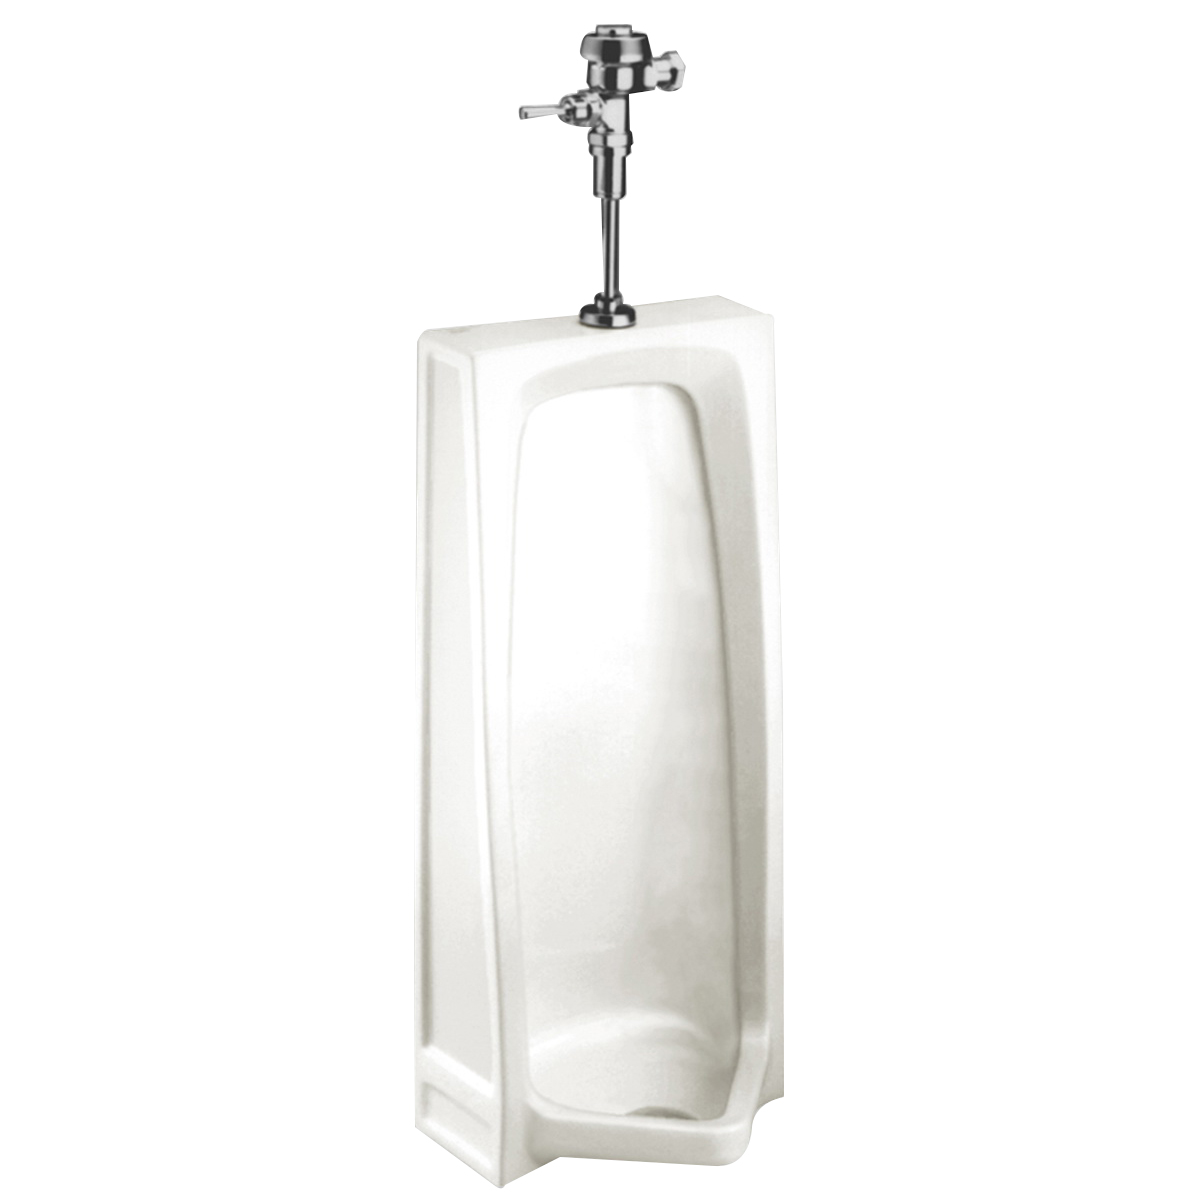 American Standard Stallbrook™ 6400.014.020 White Vitreous China Floor Mount Low Consumption Urinal, 1 gpf